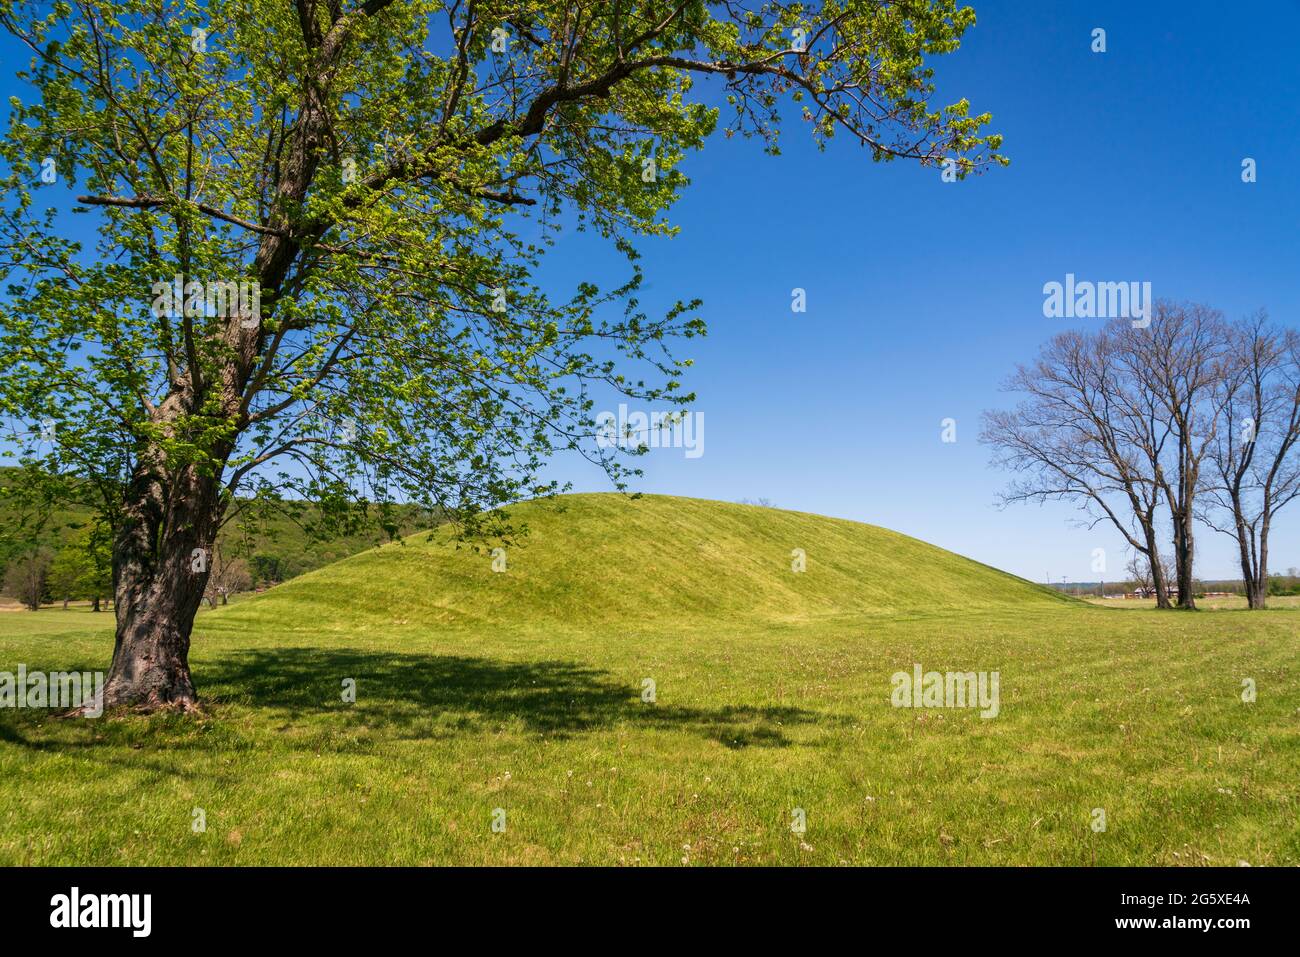 Hopewell Culture National Historical Park Stock Photo - Alamy